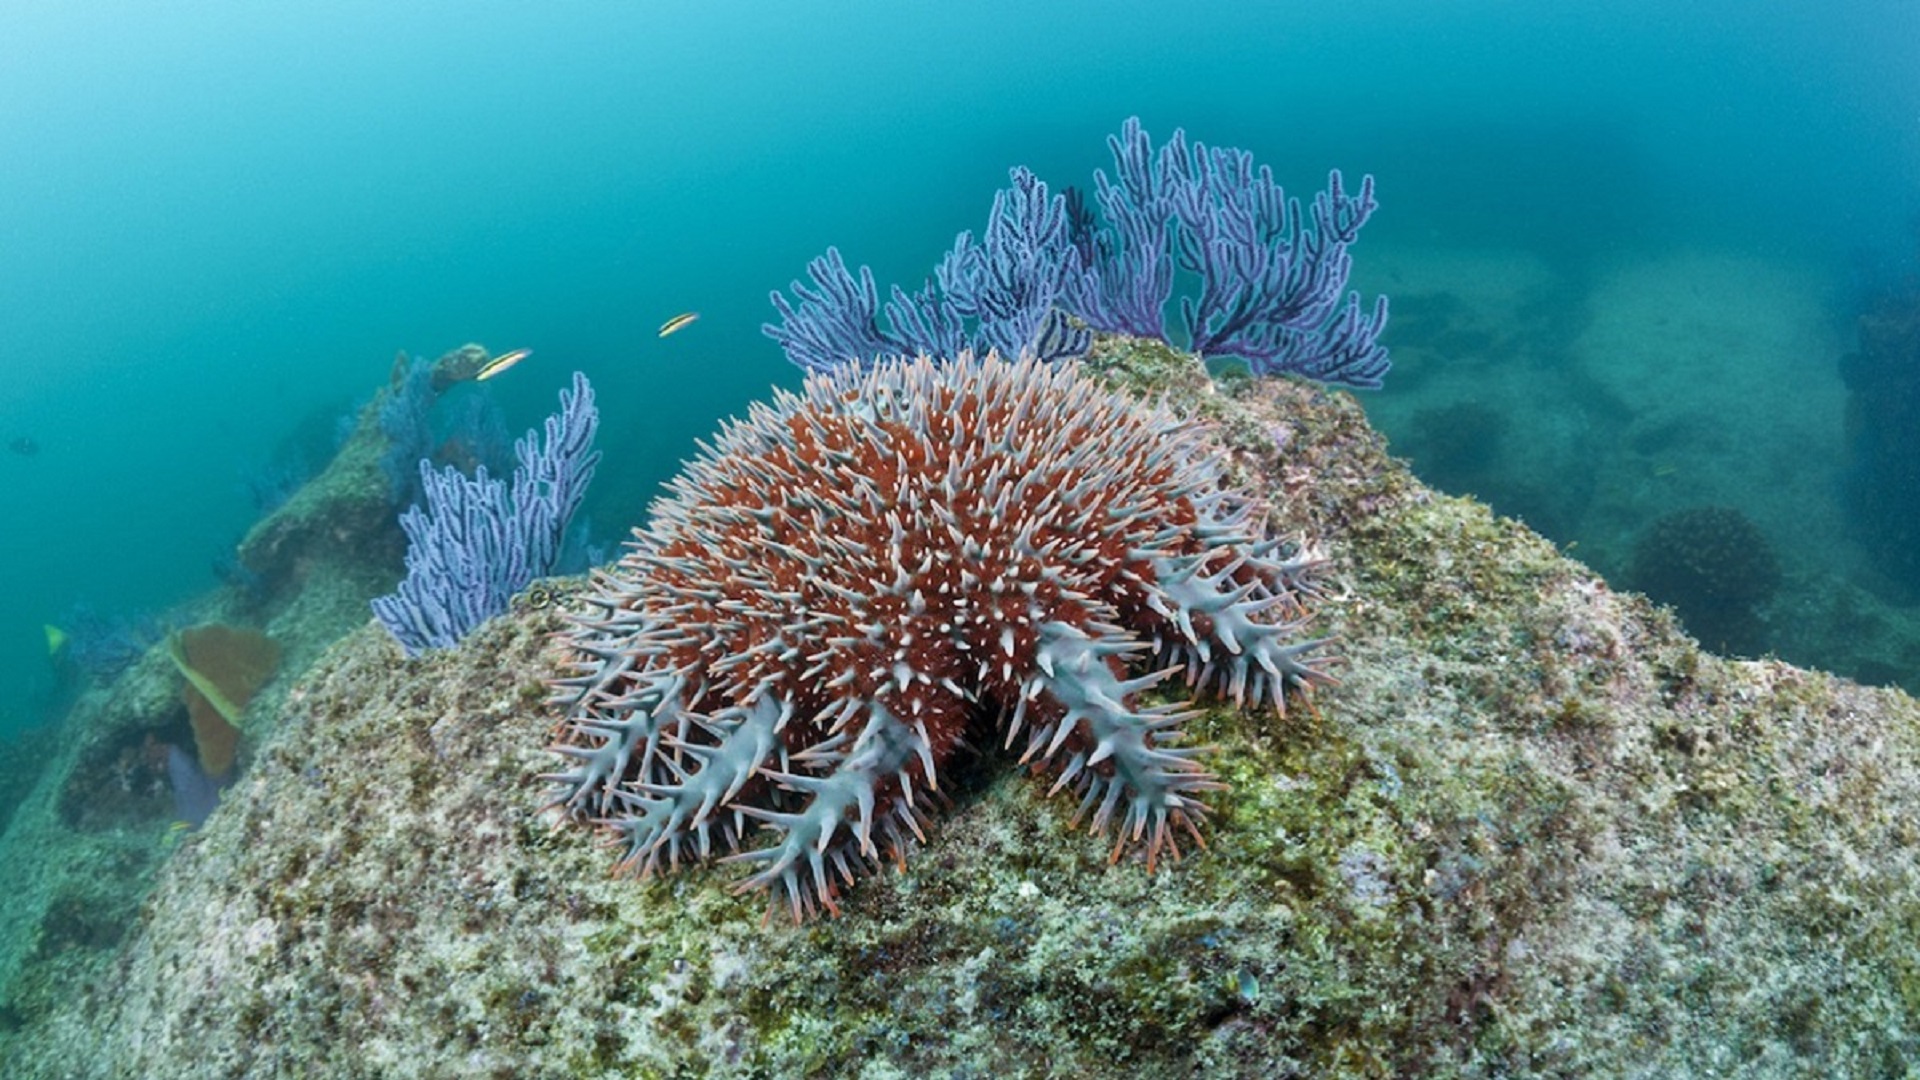 rown-of-Thorns Starfish on coral reef, 